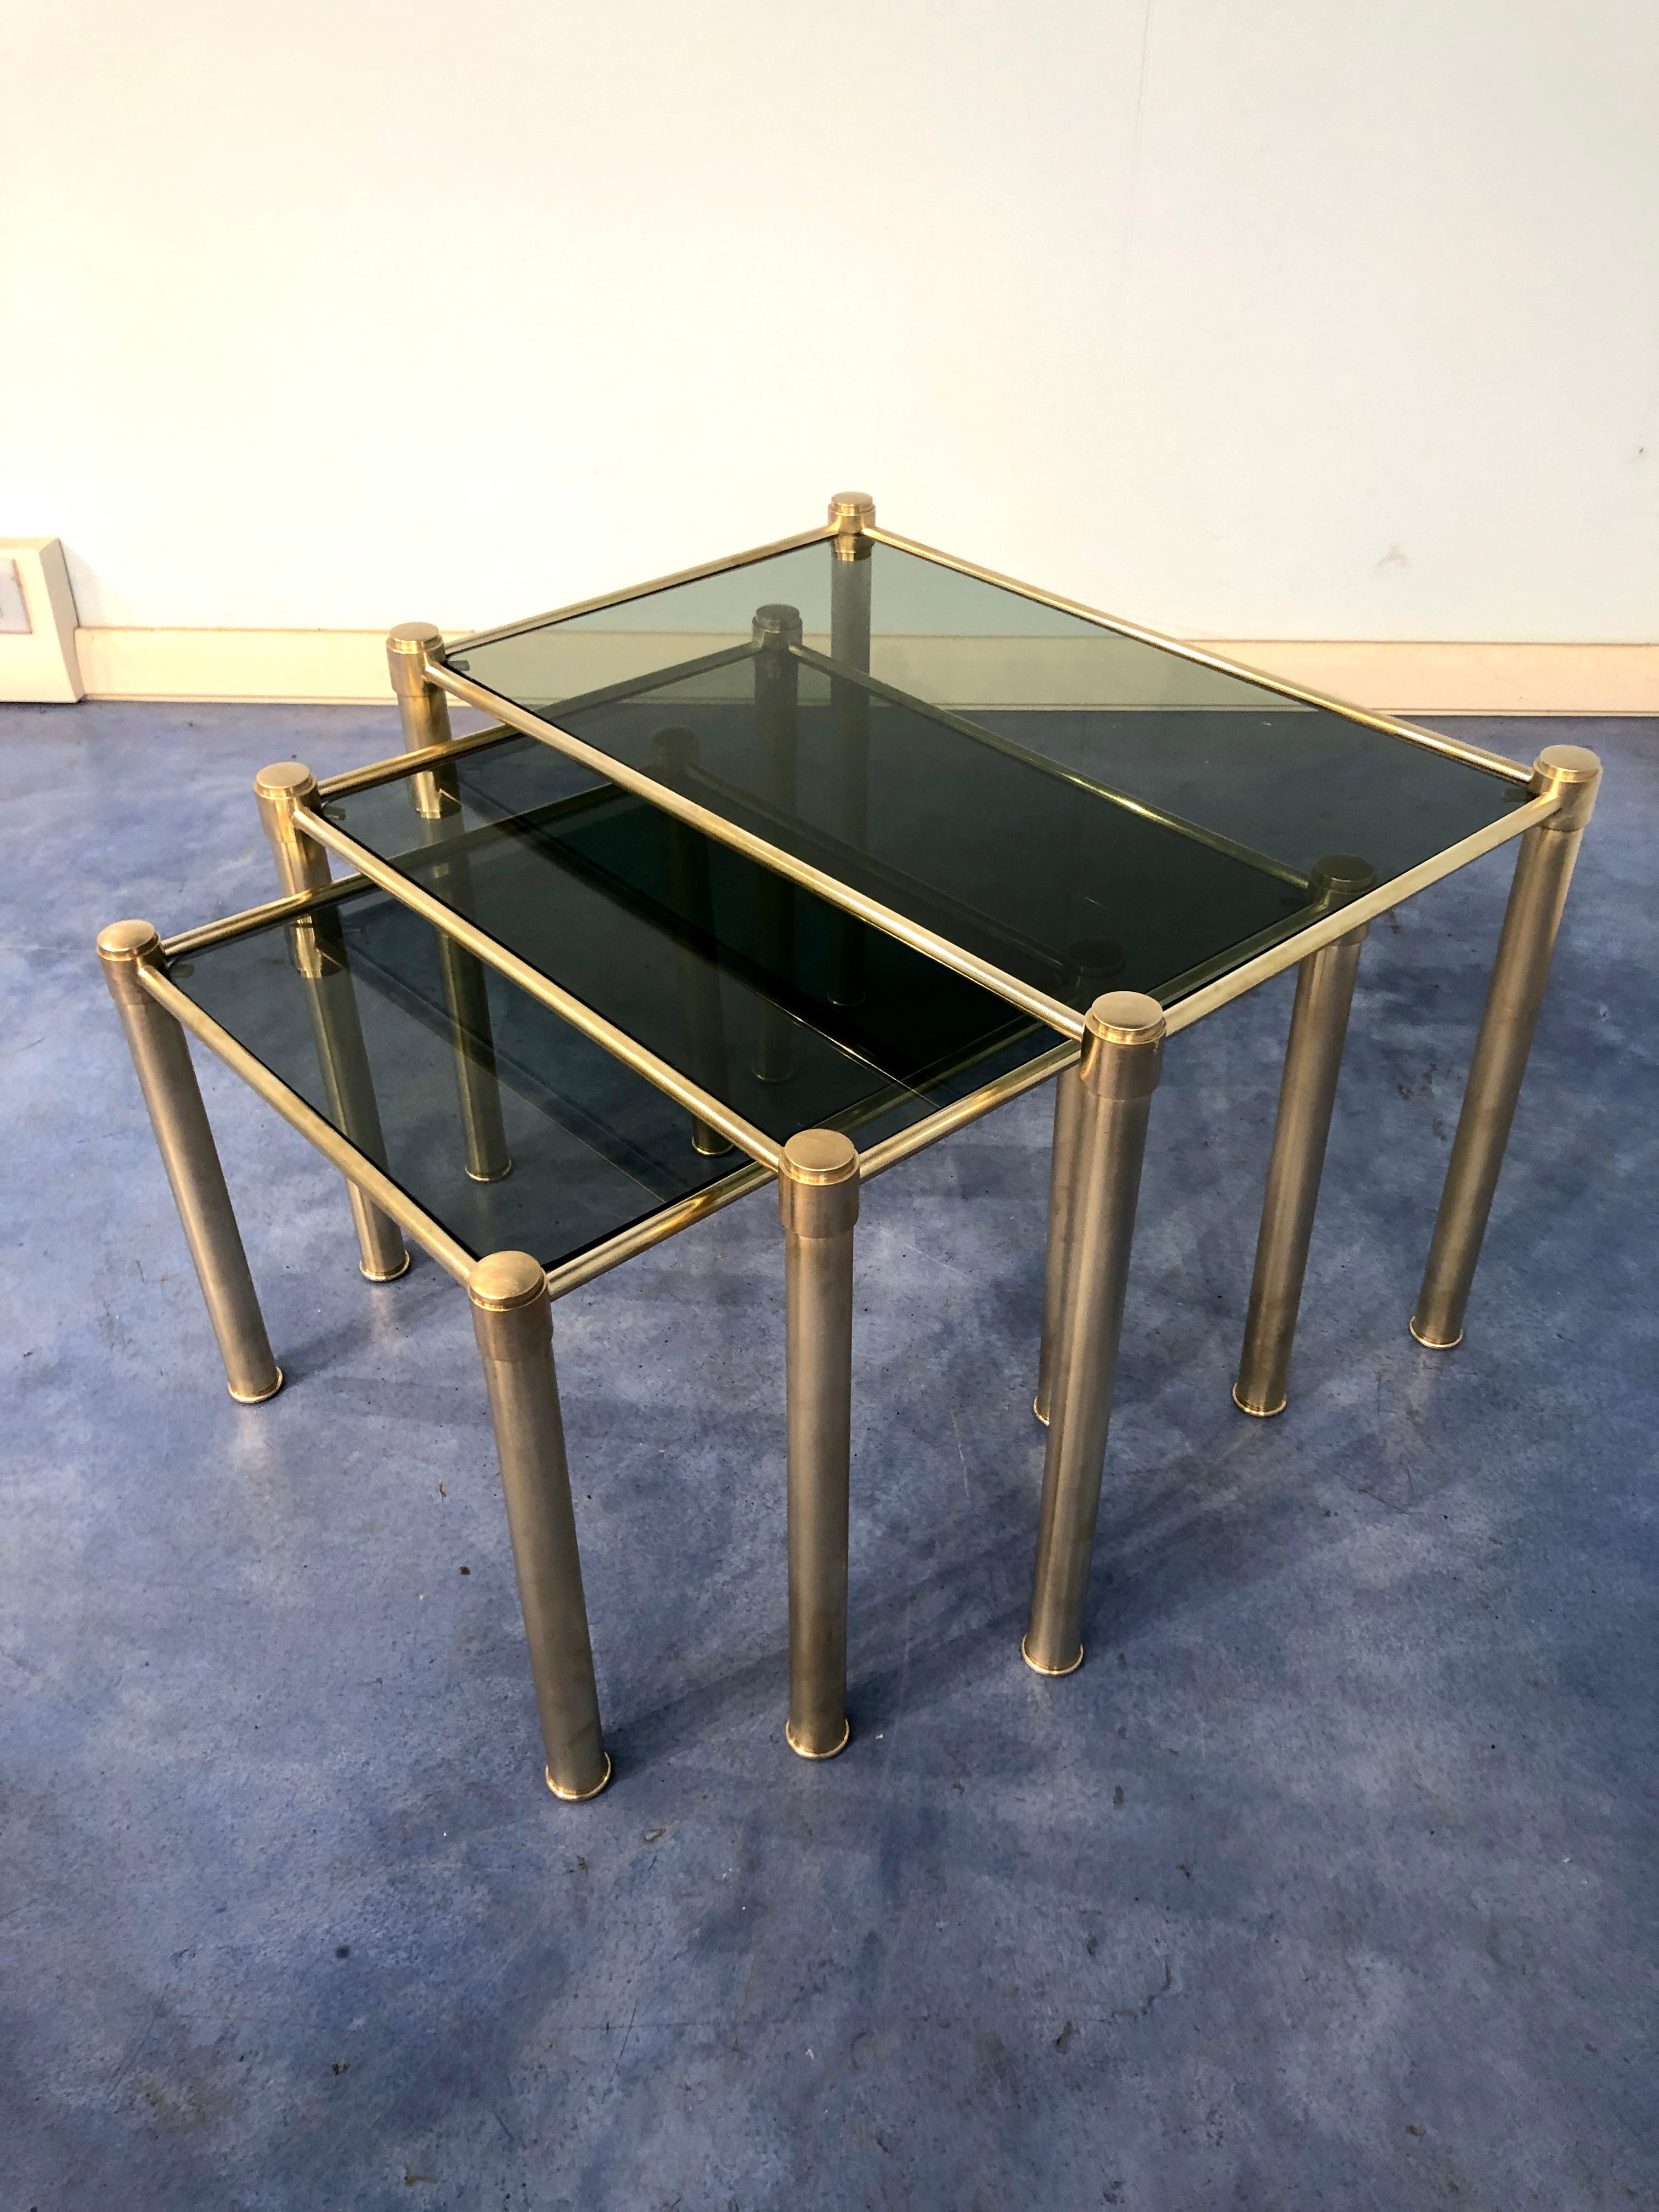 Italian Mid-Century Modern Brass and Smoked Glass Nesting Tables, 1970s For Sale 2